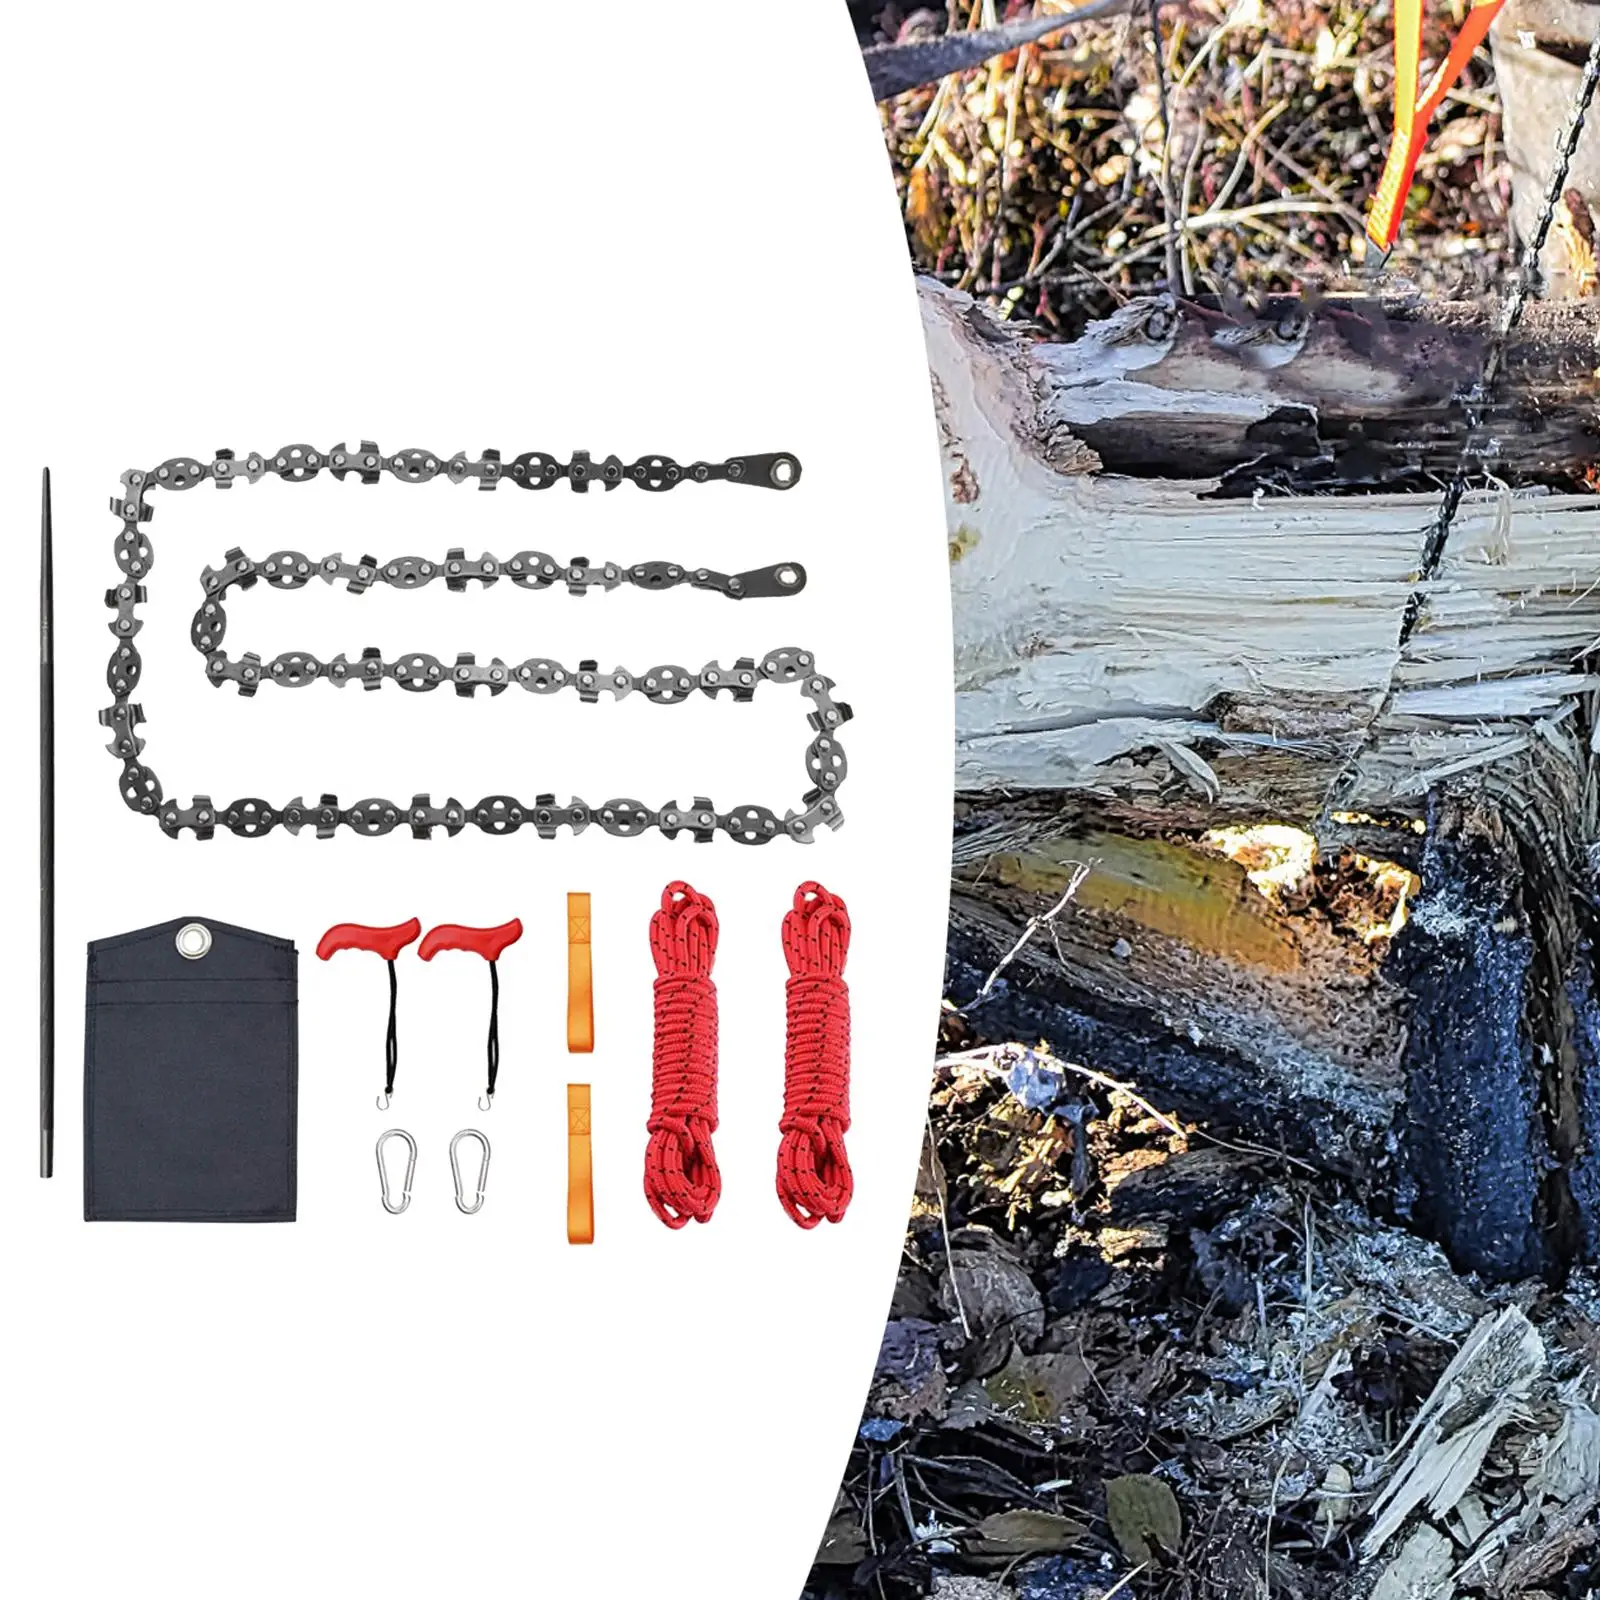 Pocket Saw Includes Ropes, S Hooks, Carabiner and Accessory Wood Cutting for Camping Outdoor Emergency Fishermen Gardening